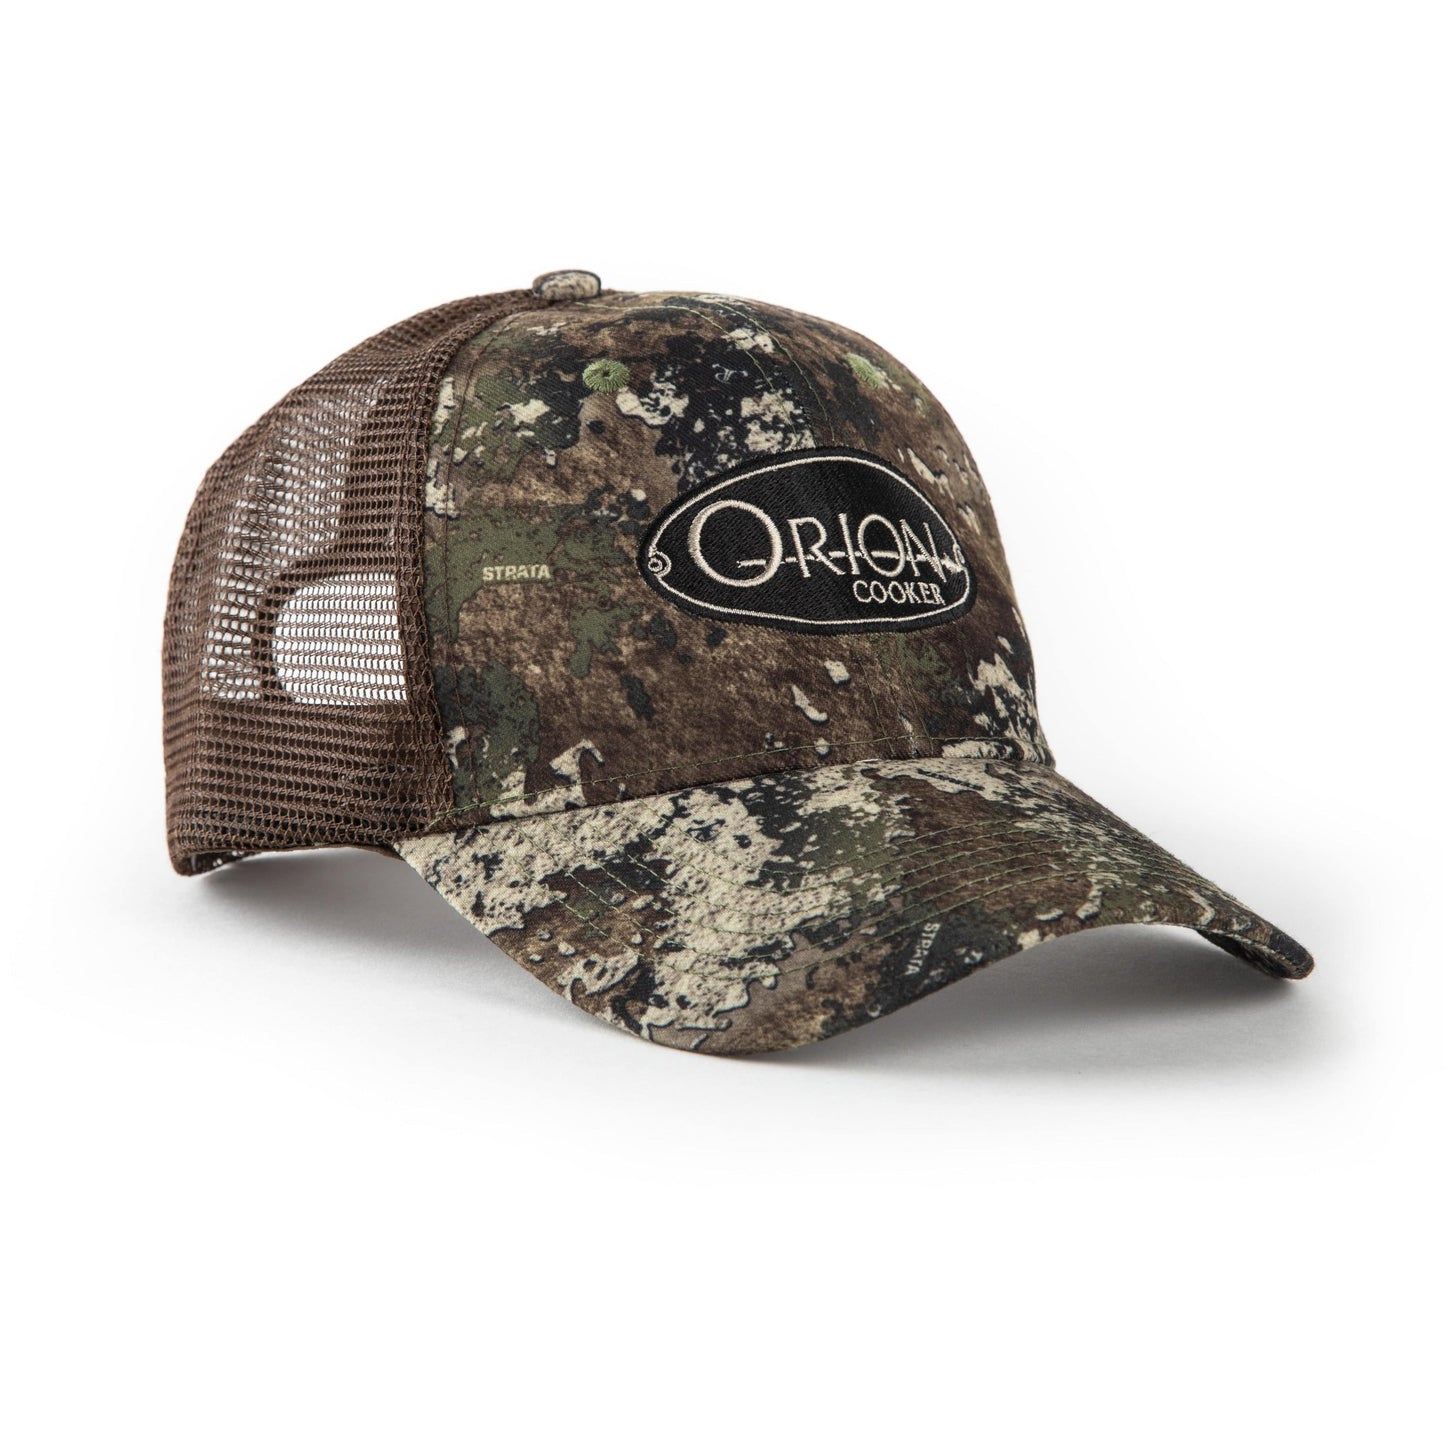 Orion Cooker Camo Hat Right